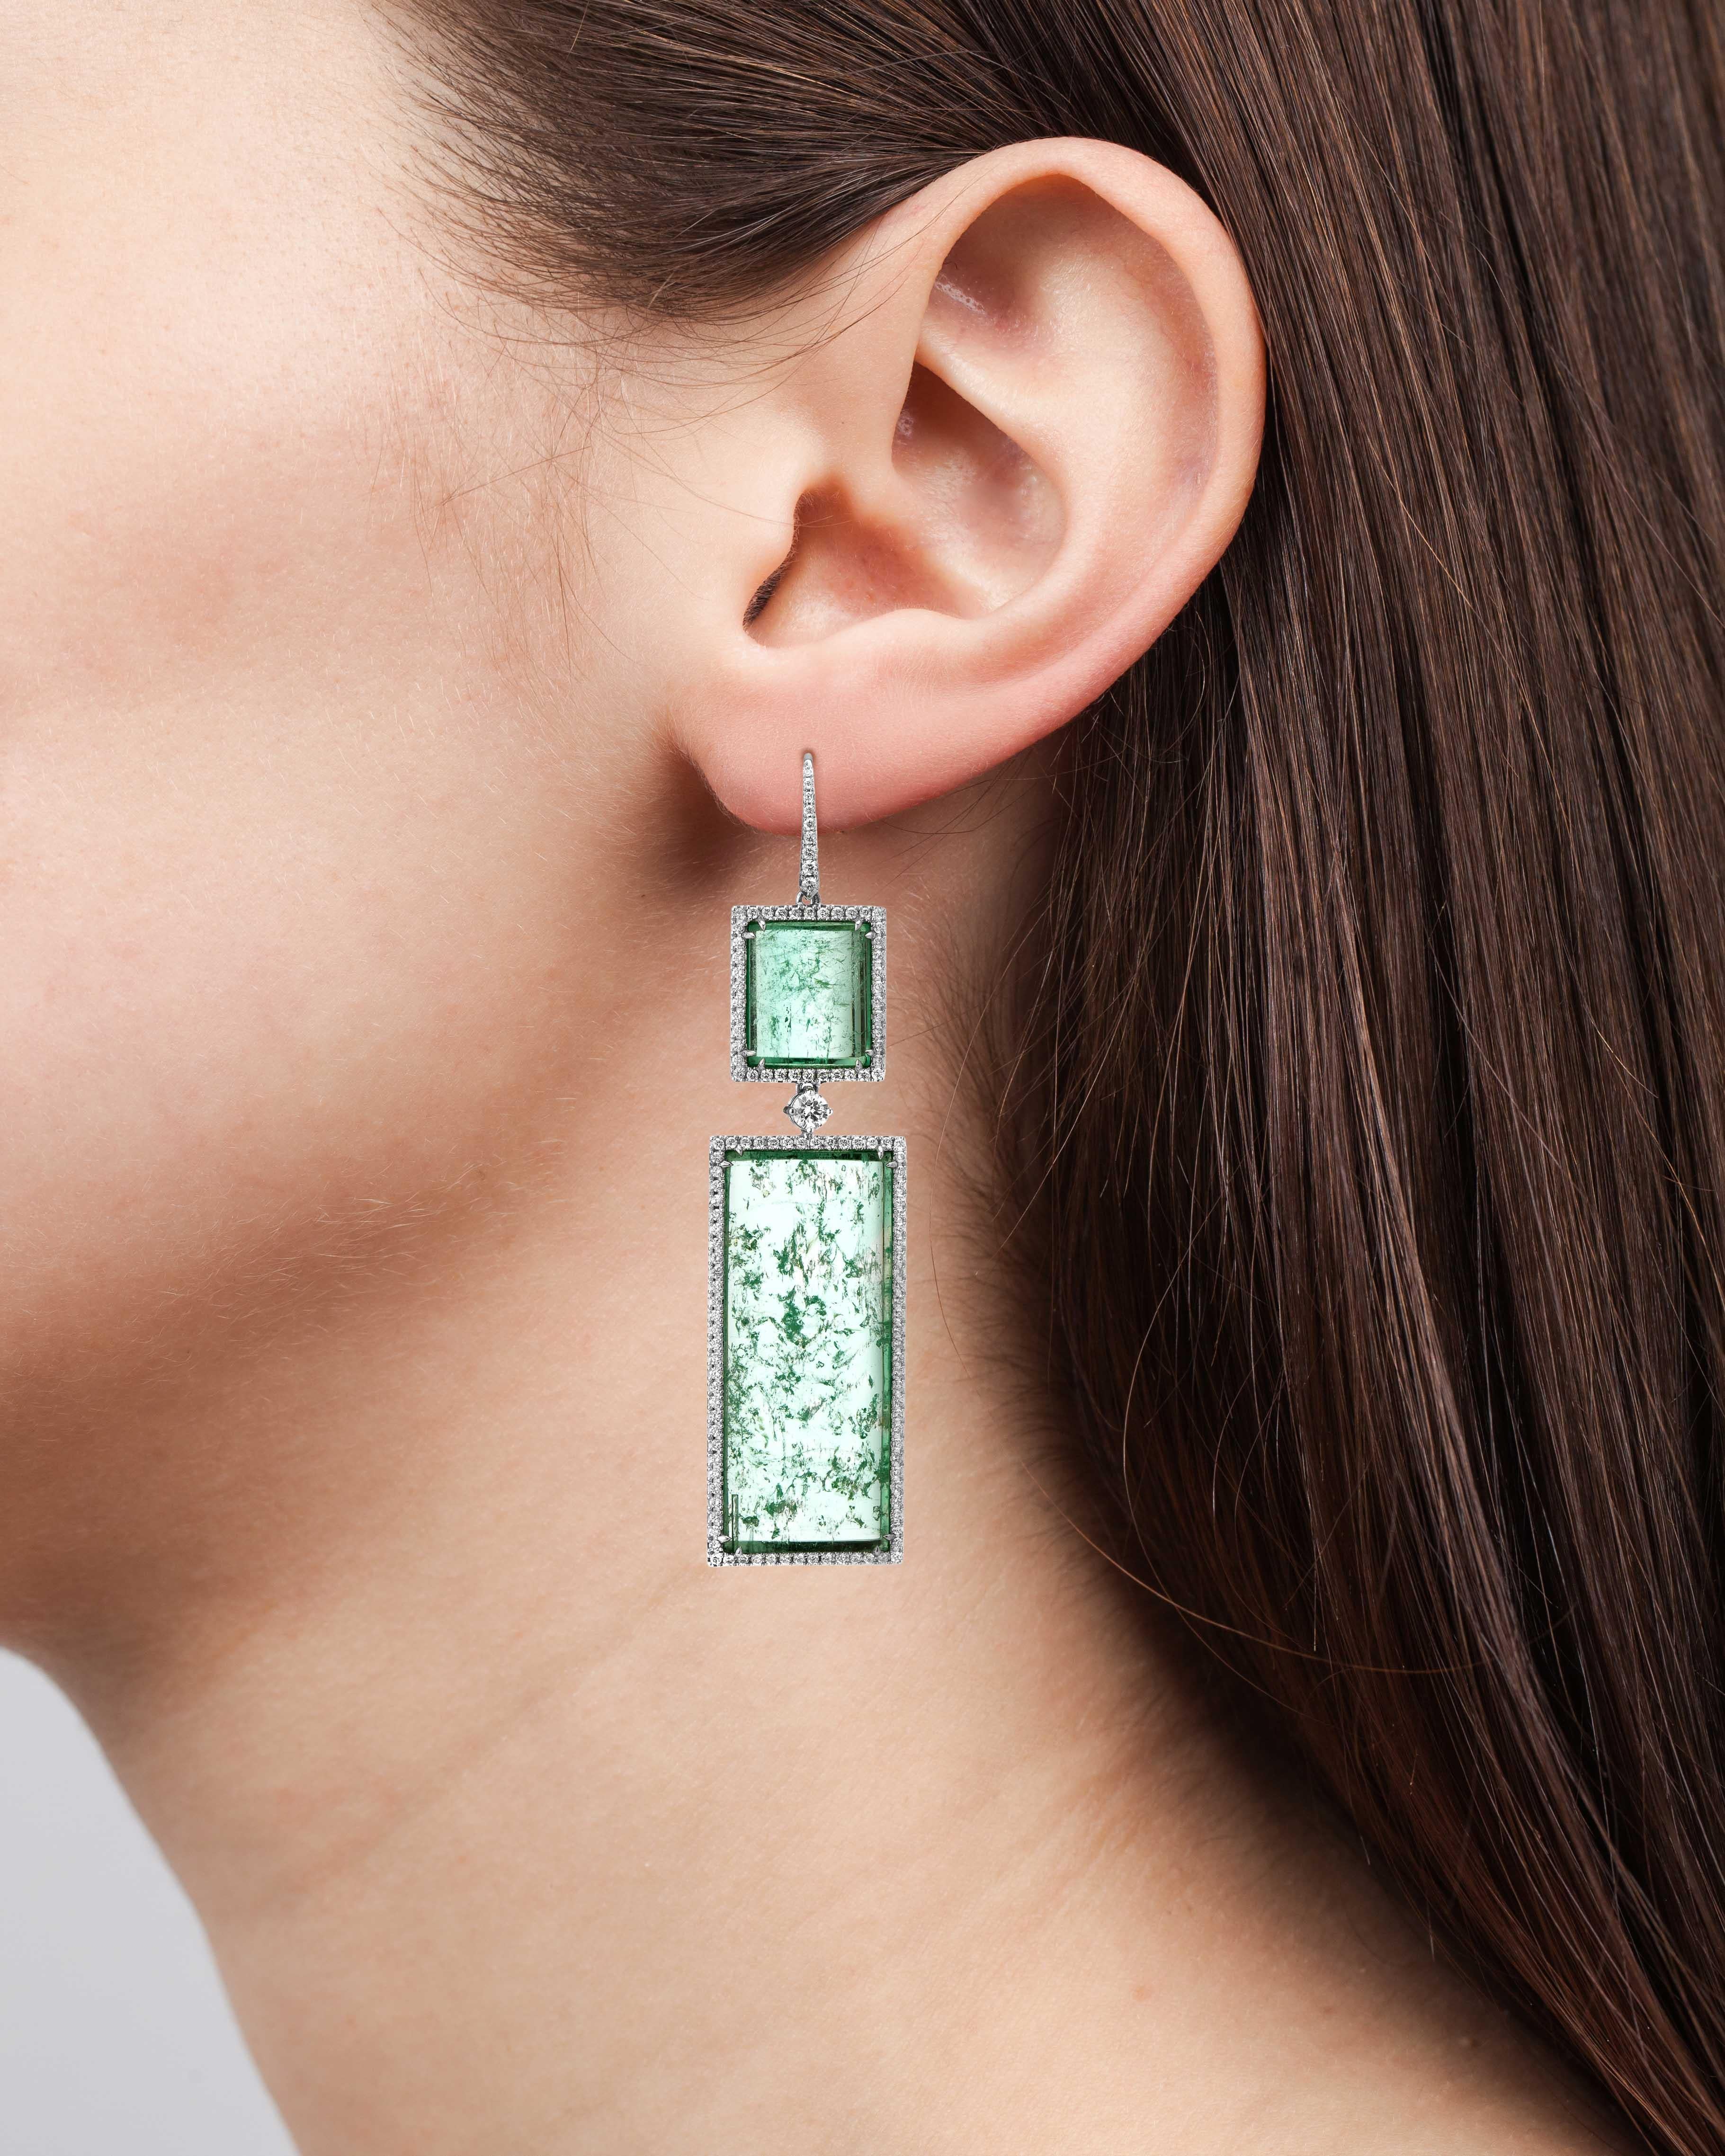 Handmade 18k white gold earrings with 34.51 carats of emeralds from the legendary Muzo mines and 1.64 carats of white diamonds. 

Muzo Emerald Colombia Heritage Atocha Earrings set with 34.51 carats Emerald

Atocha is inspired by a collection of